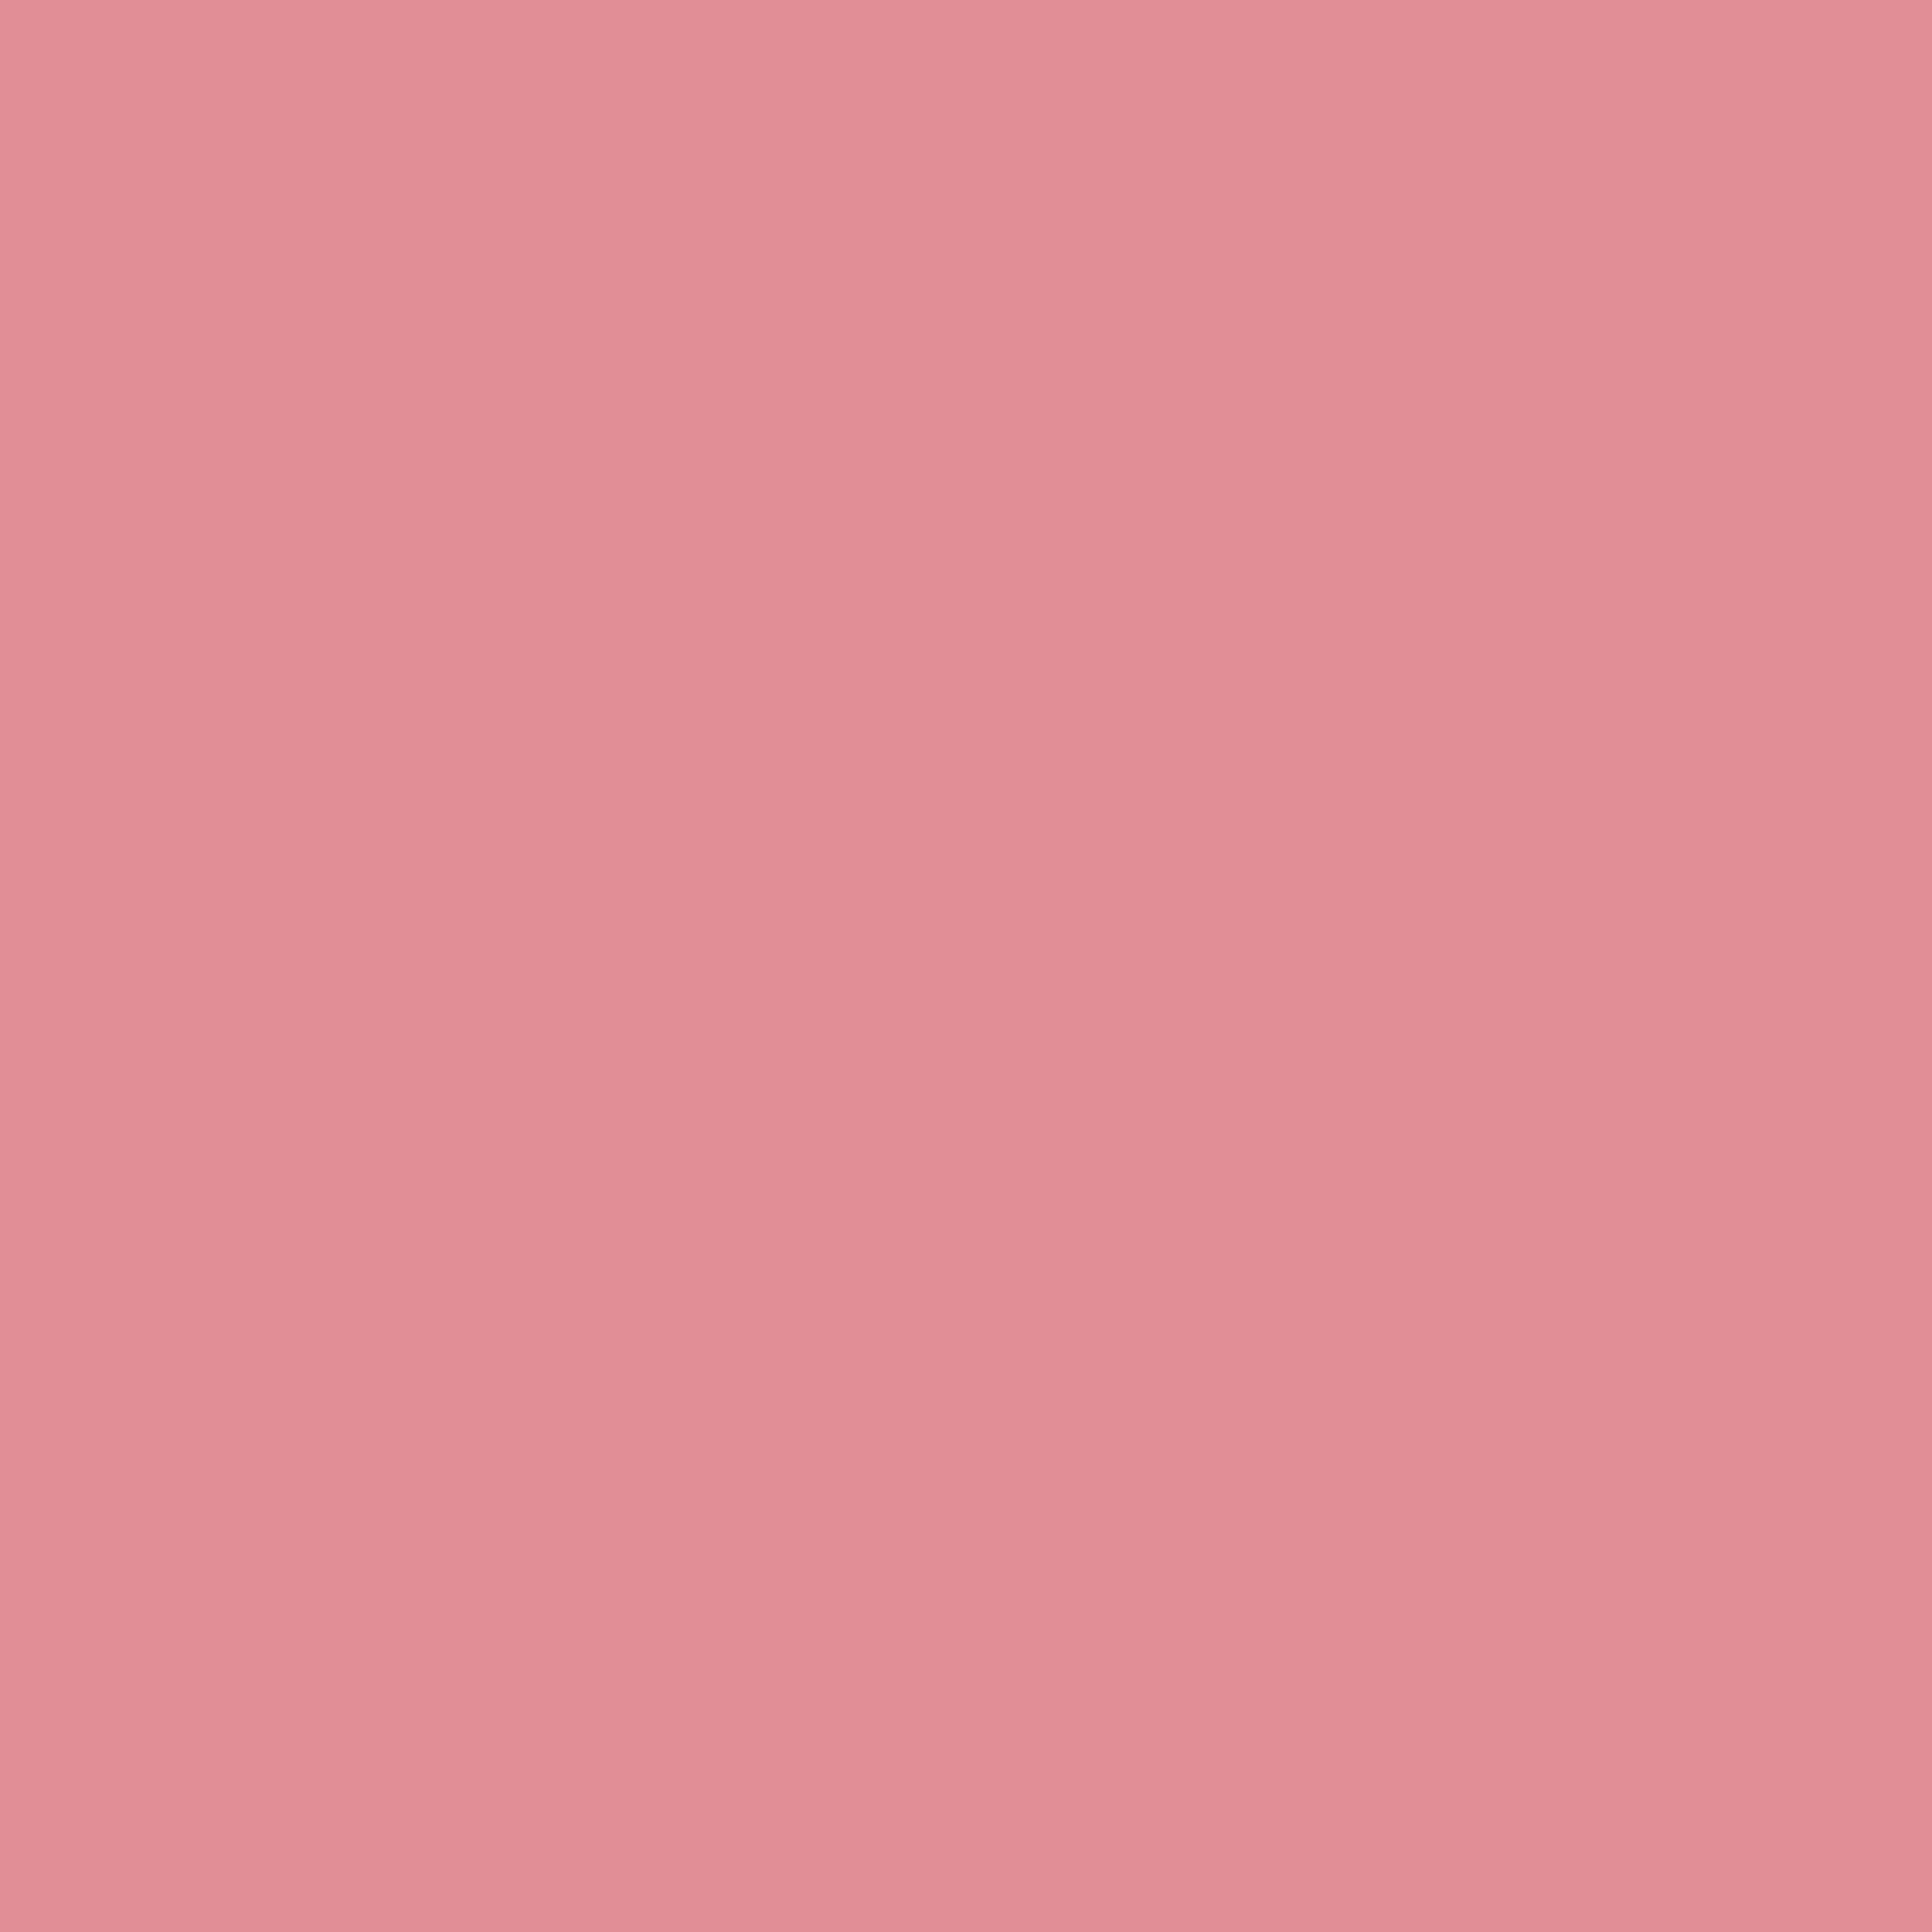 2048x2048 Ruddy Pink Solid Color Background